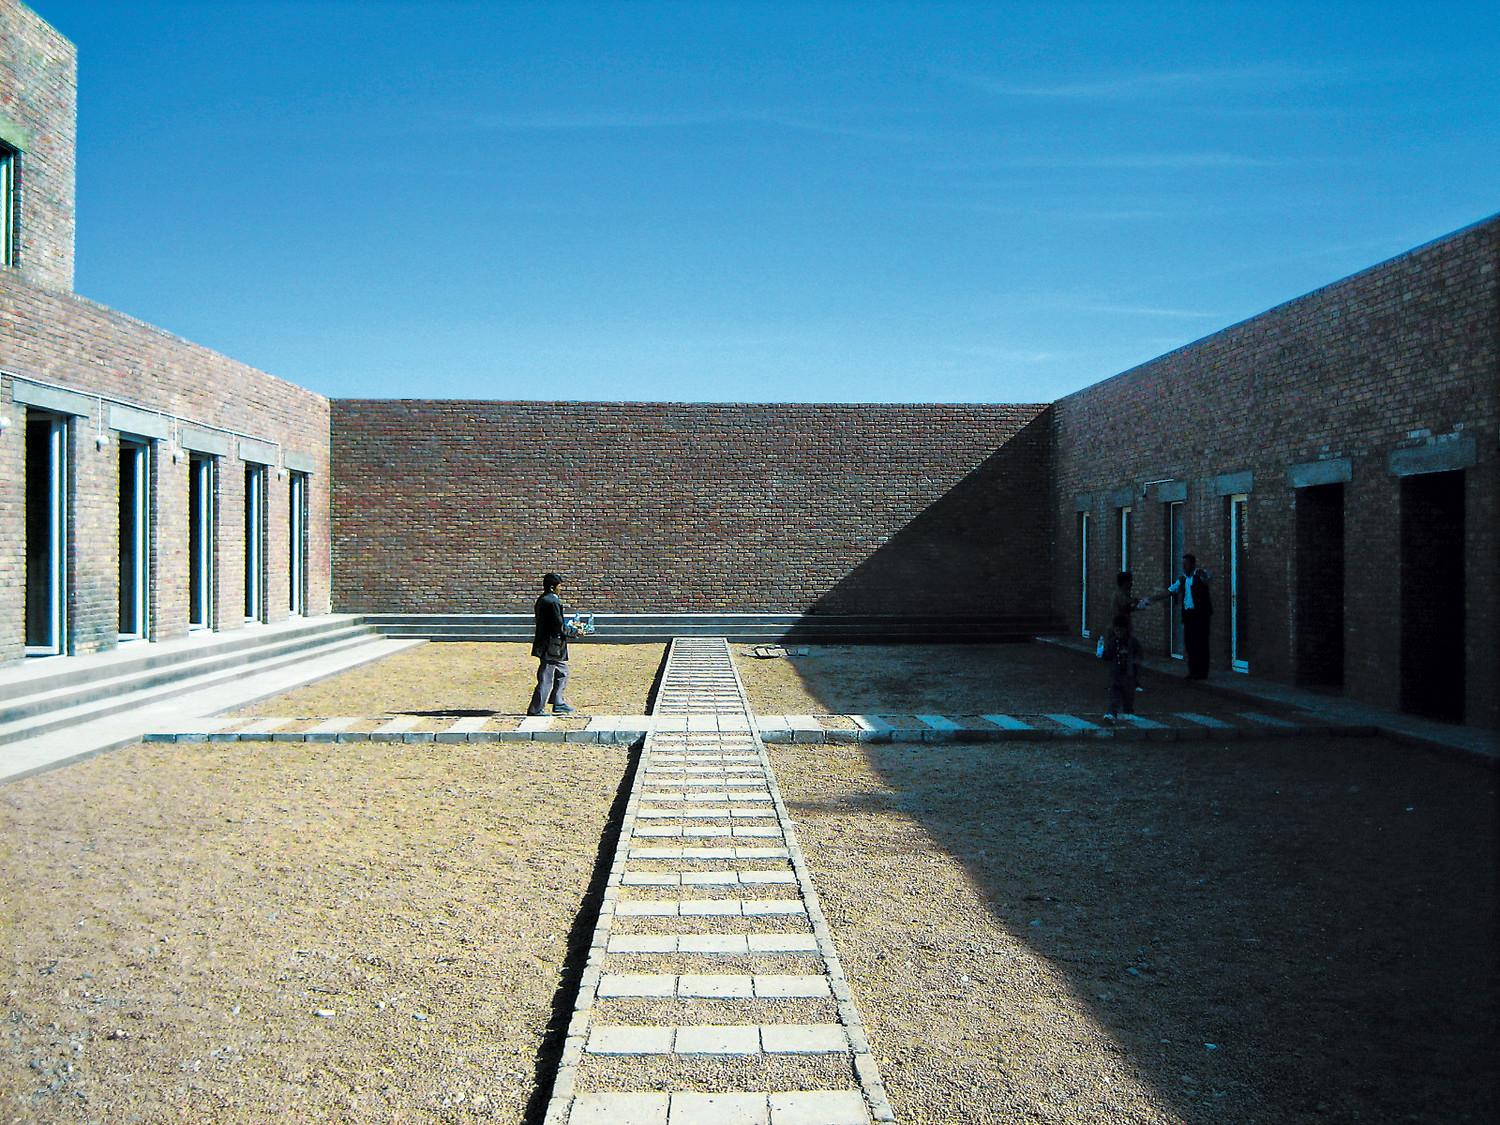 The Building: Courtyard